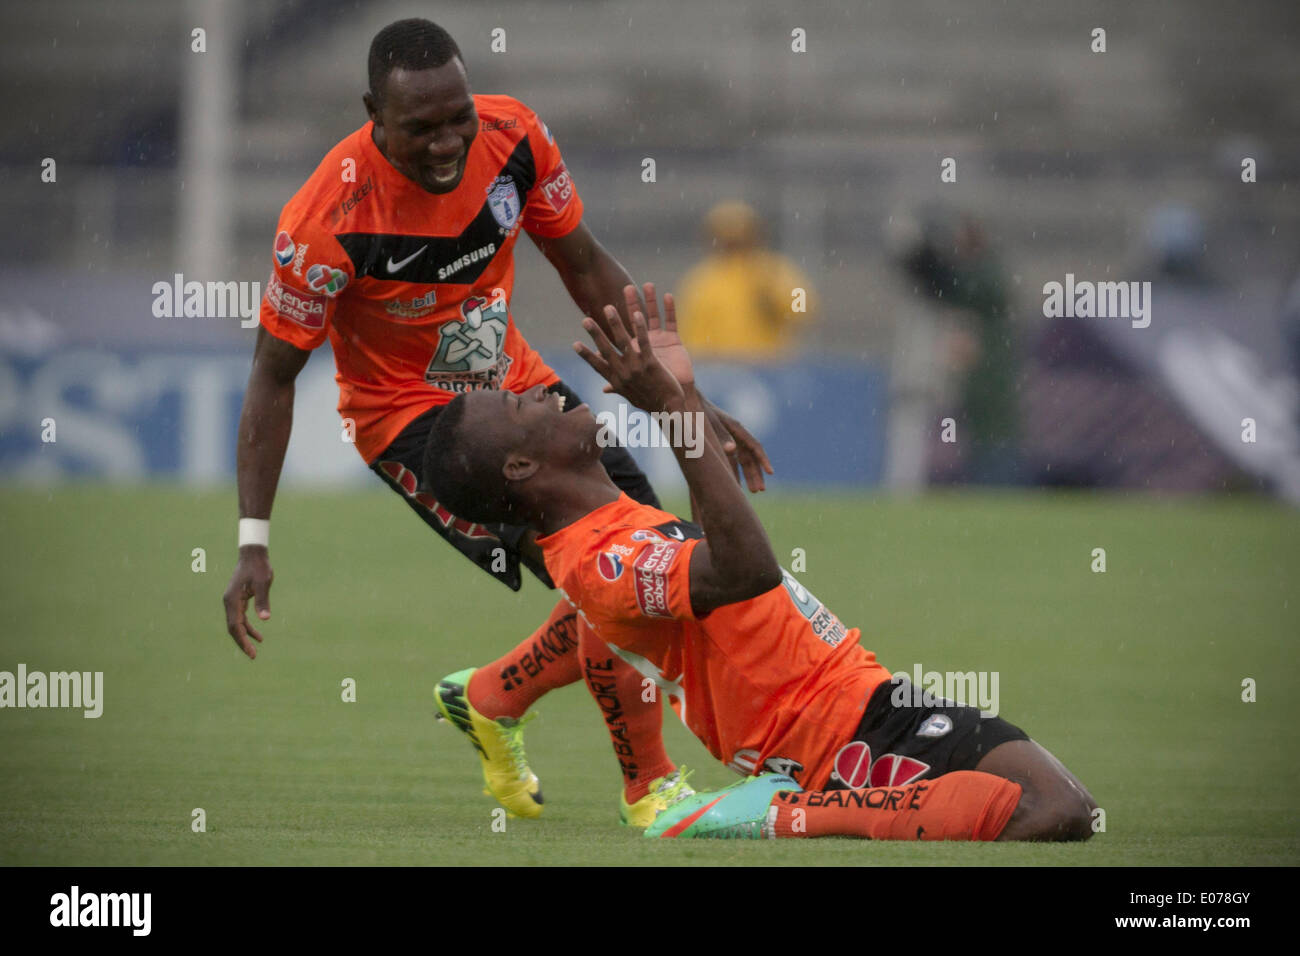 Mexico City, Mexico. 4th May, 2014. Pachuca's Enner Valencia (Front) celebrates after scoring with his teammate Walter Ayovi during a match of the Liga MX, against UNAM's Pumas held at Universitary Olympic Stadium in Mexico City, capital of Mexico, on May 4, 2014. © Alejandro Ayala/Xinhua/Alamy Live News Stock Photo